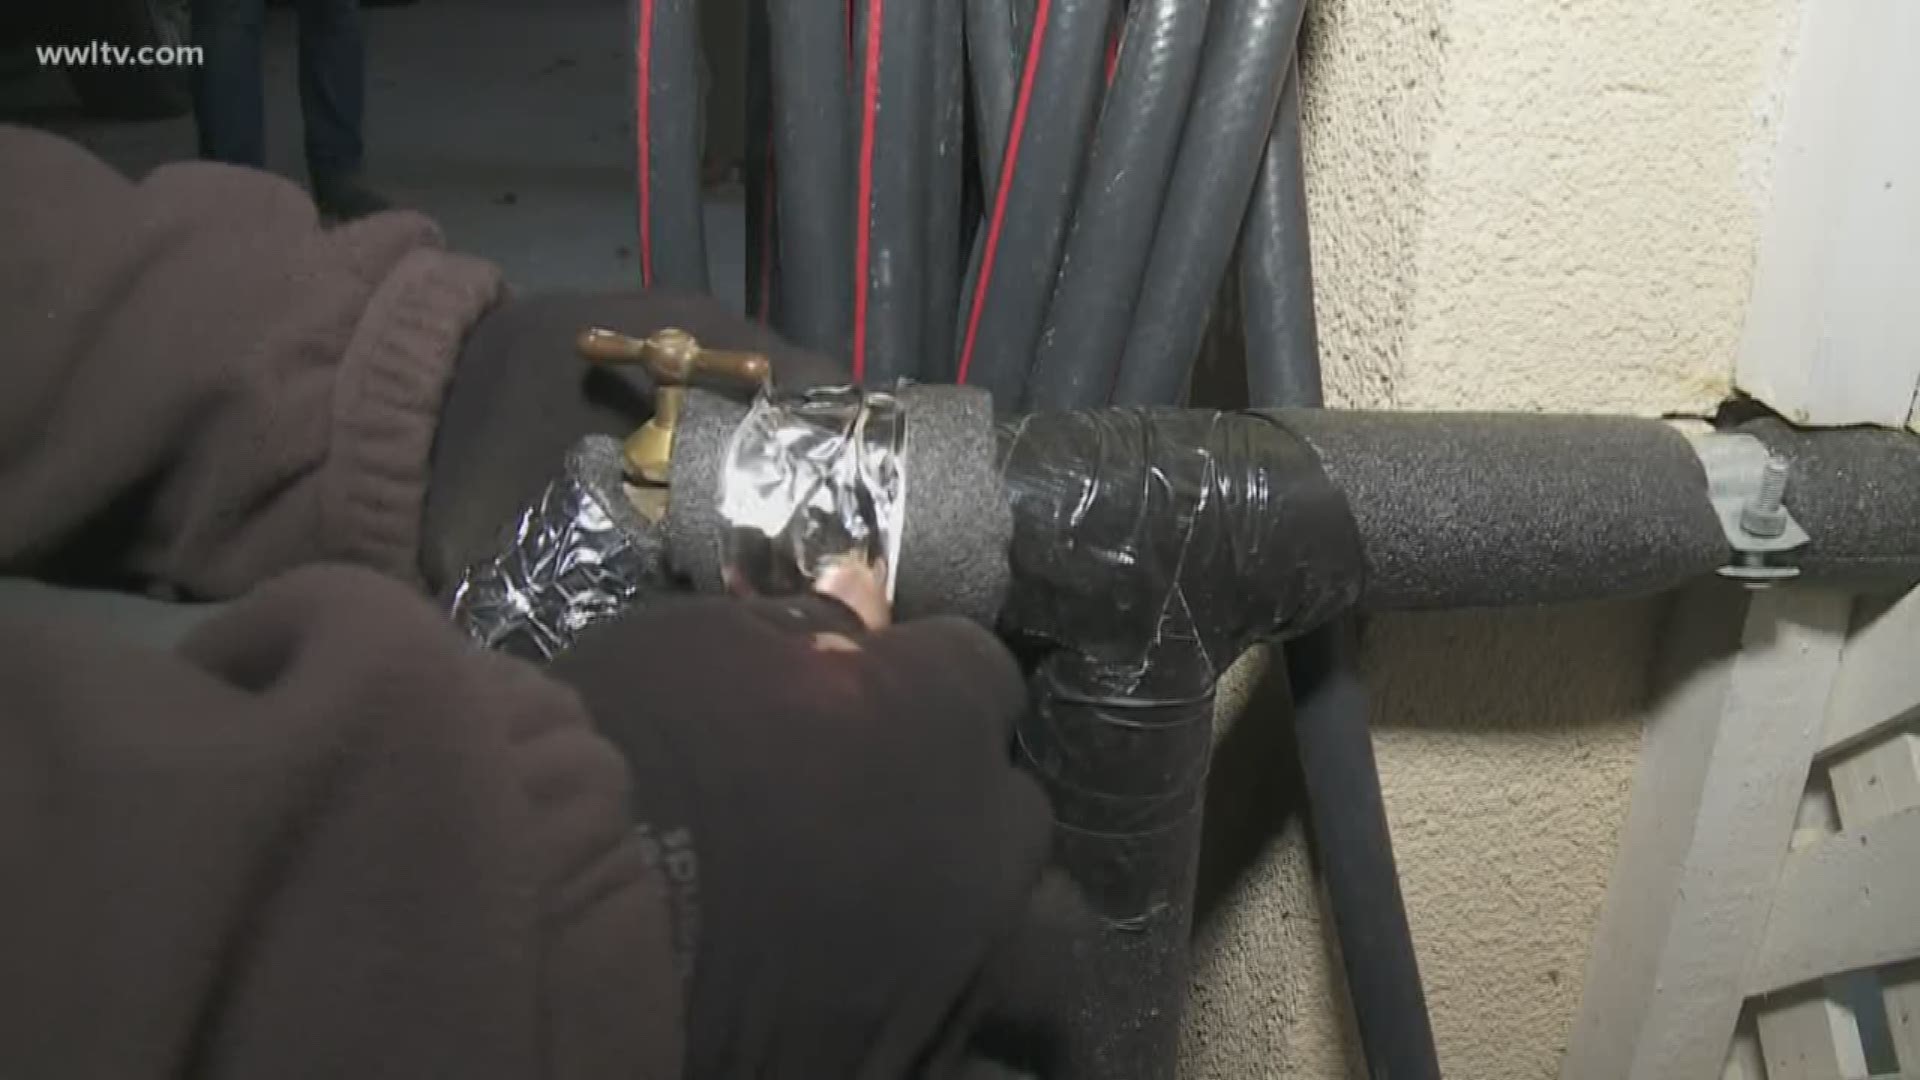 Many people spent the day preparing their homes (and pipes) for the dip in the temperature at night this week.